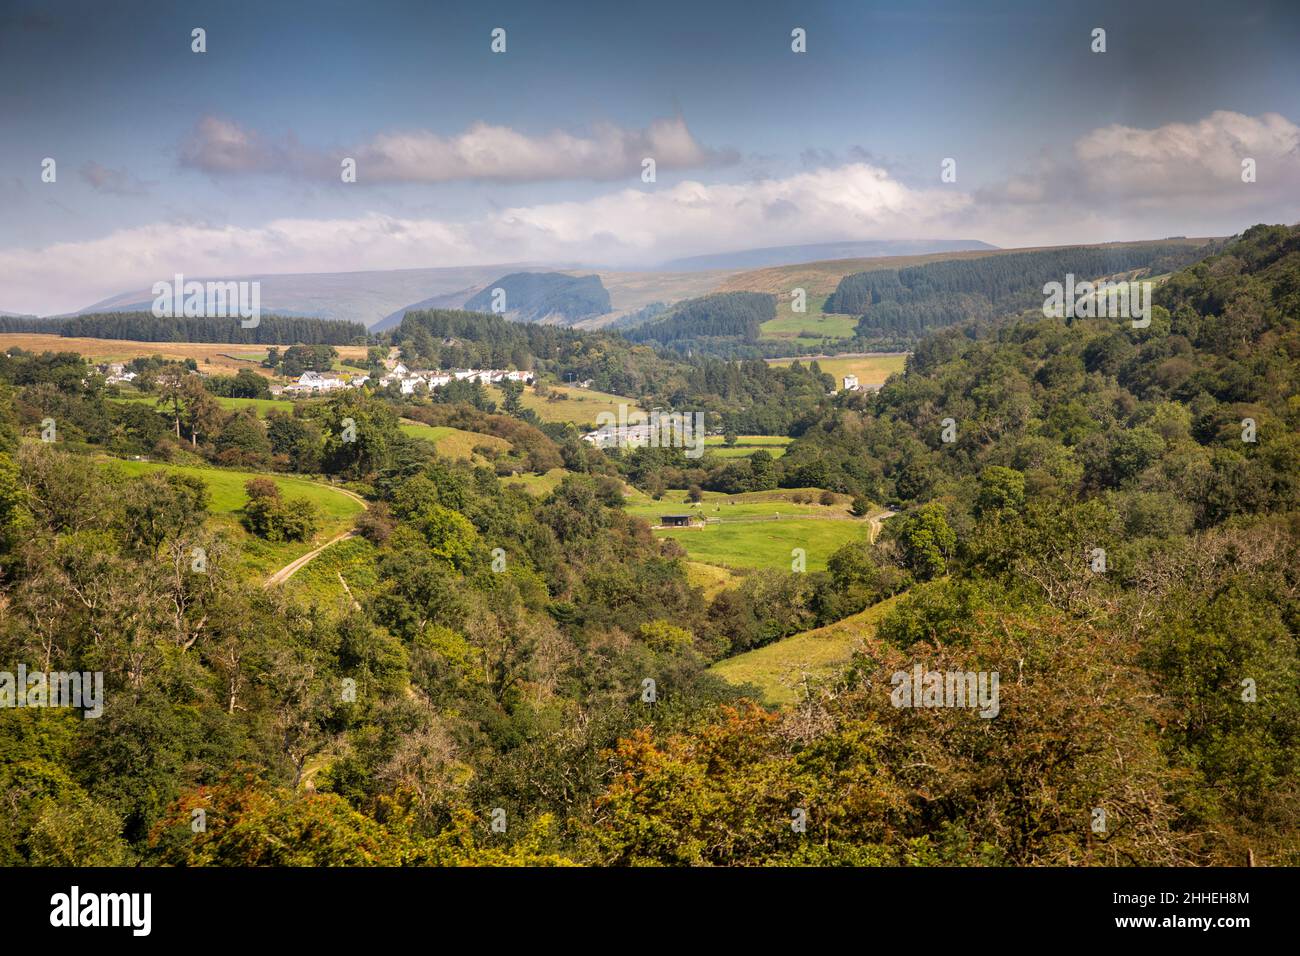 UK, Wales, Merthyr Tydfil, Pant, Brecon Mountain Railway, view from moving train window towards Pontsticill Stock Photo